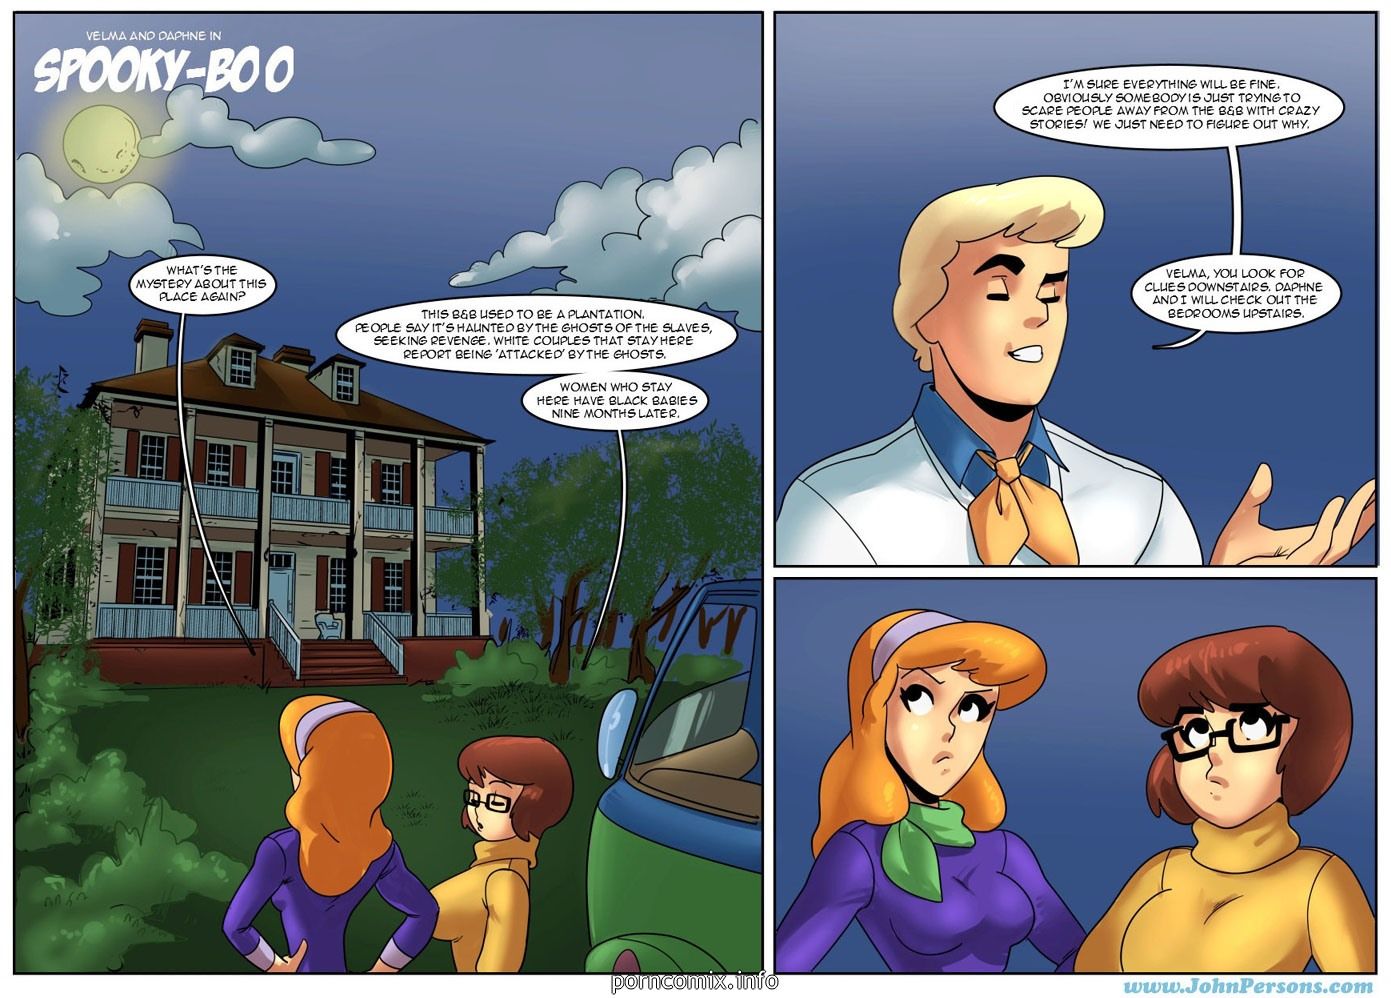 Spooky Doo - Johnpersons, Scooby Doo page 1